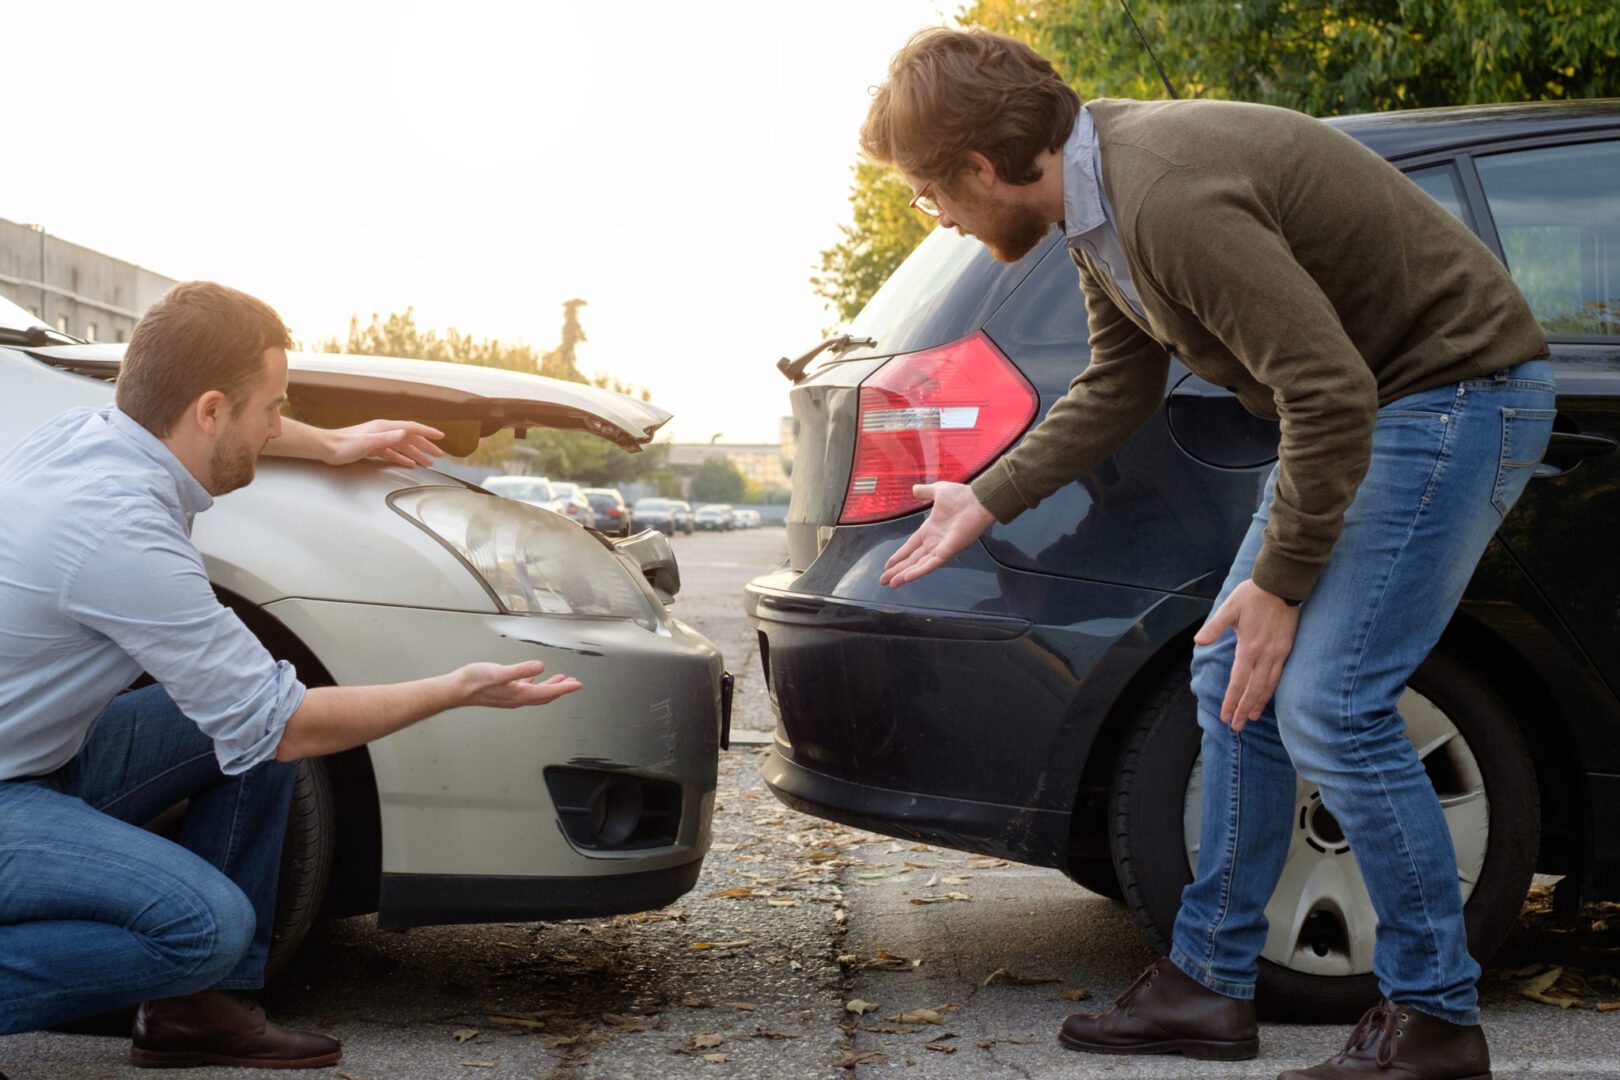 A man and woman arguing over the damage of their car.